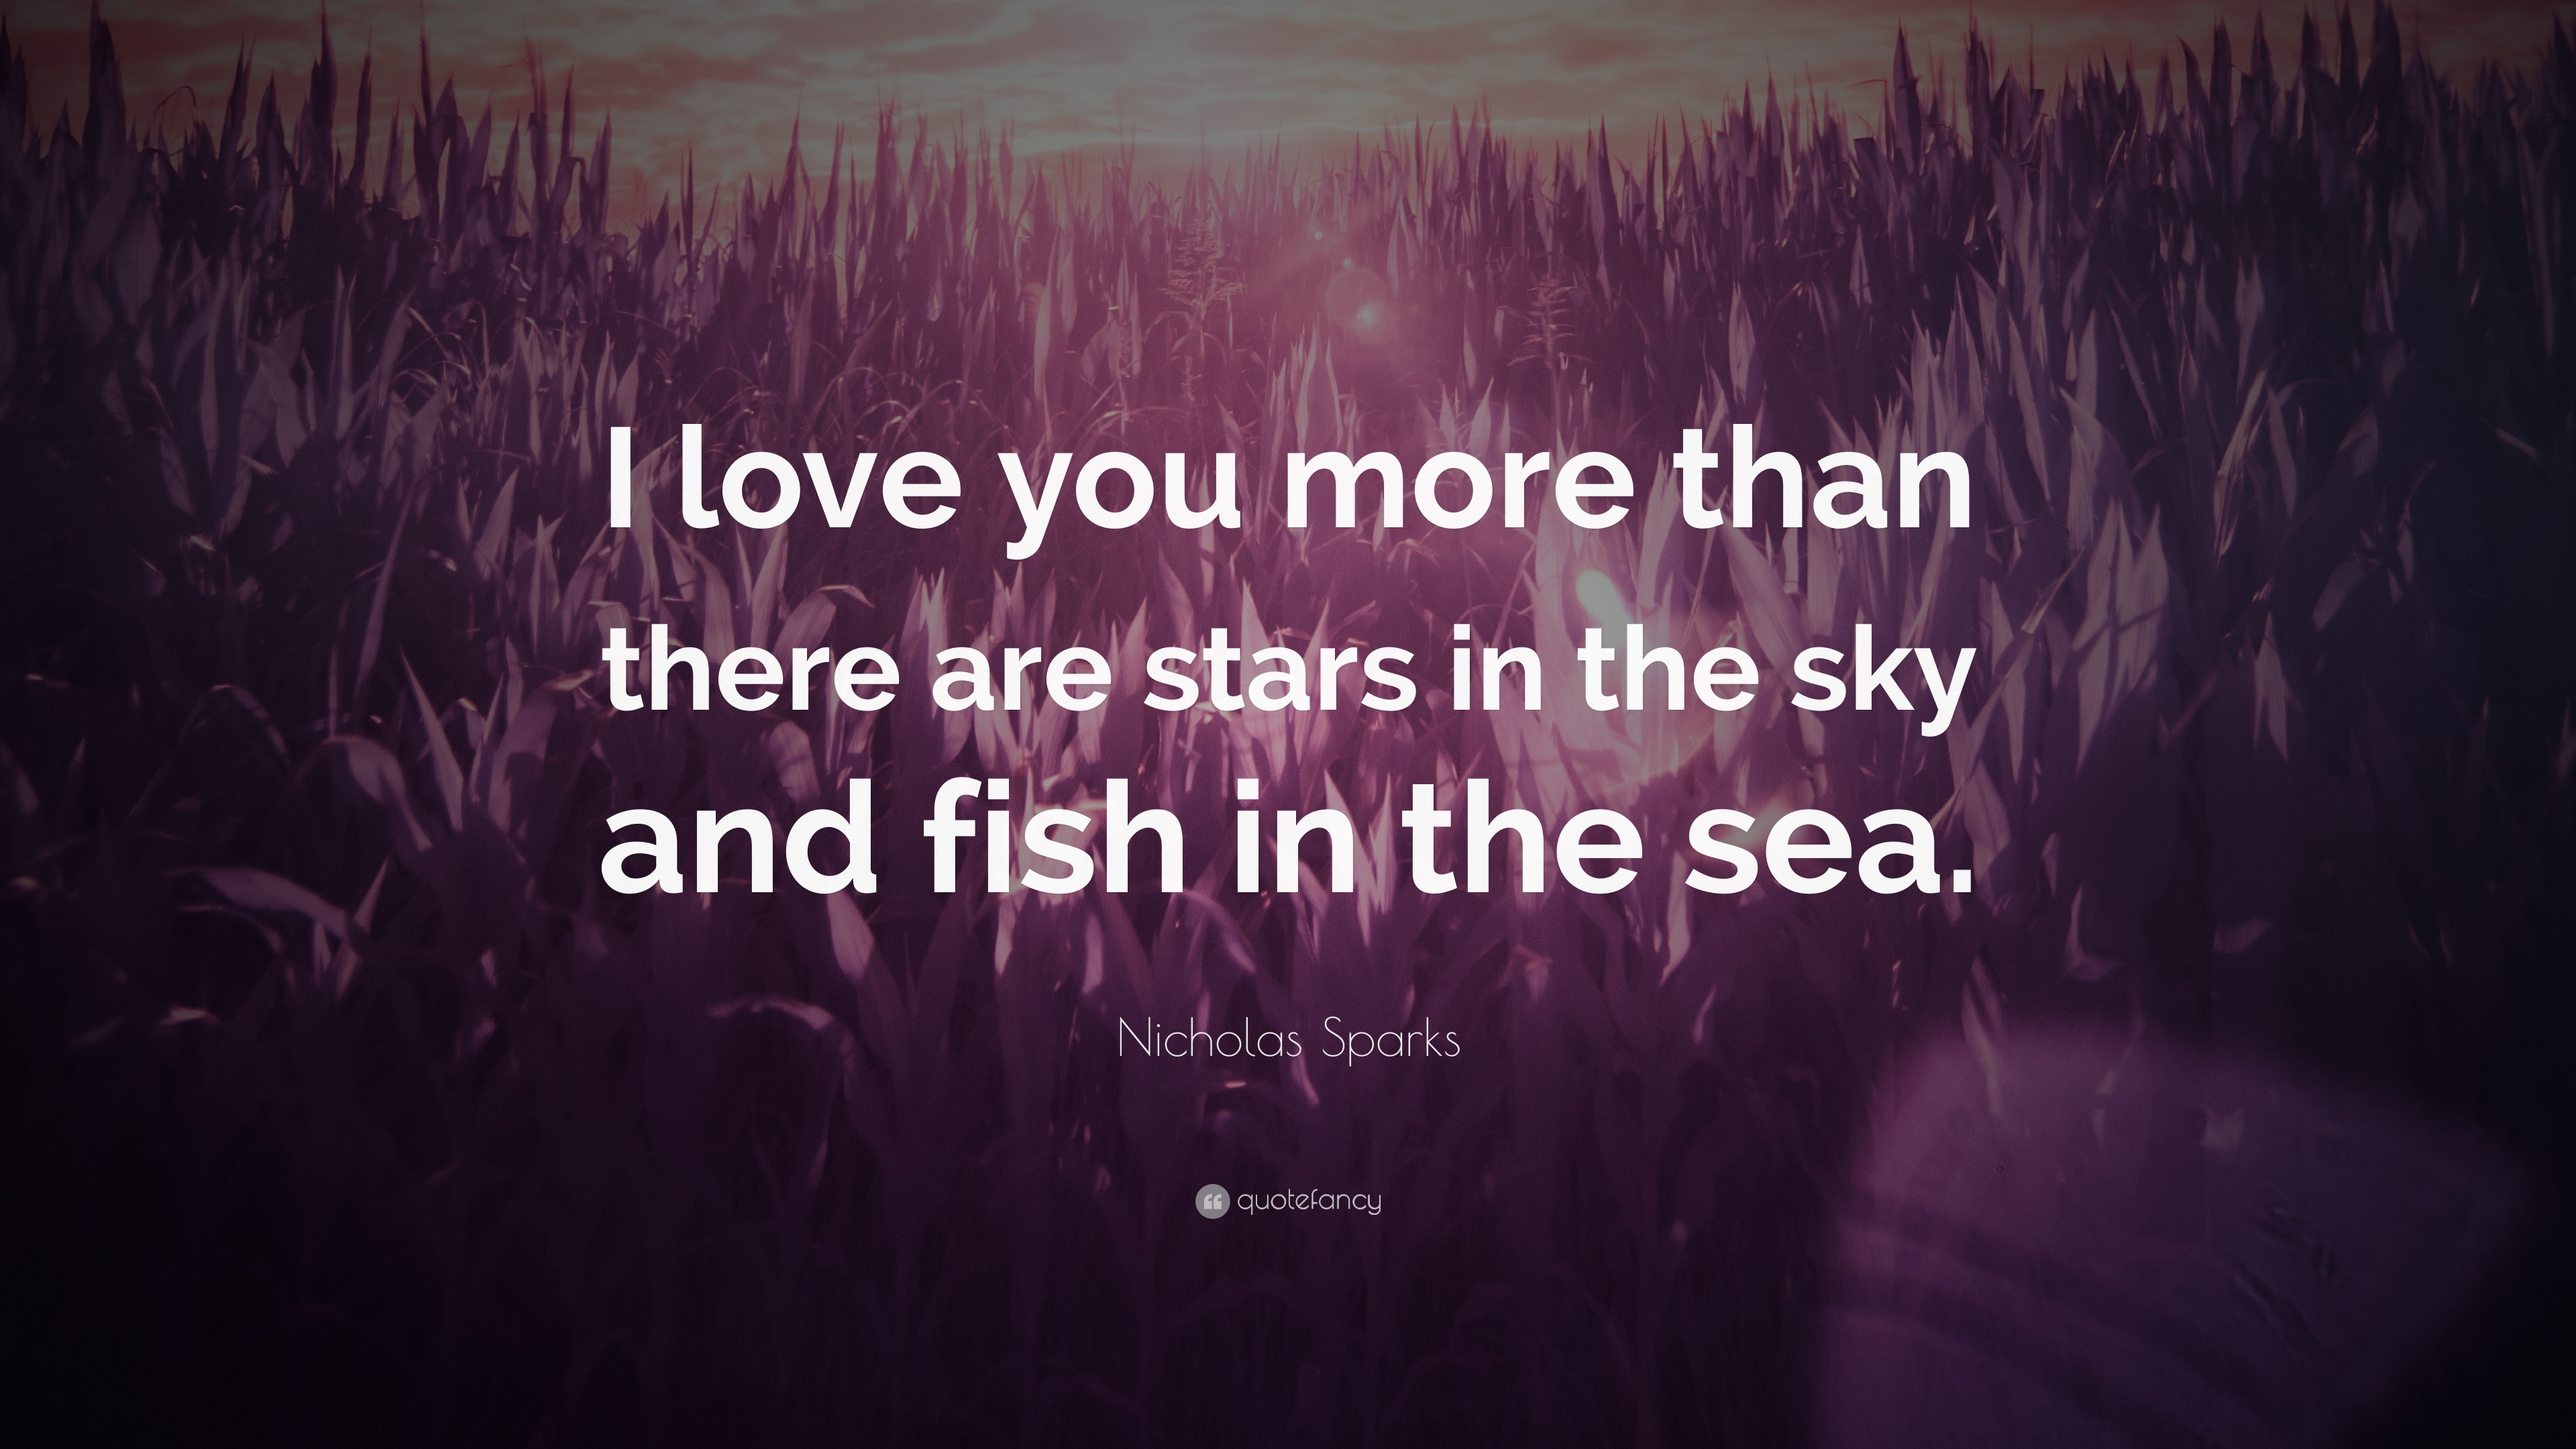 Nicholas Sparks Quote “I love you more than there are stars in the sky